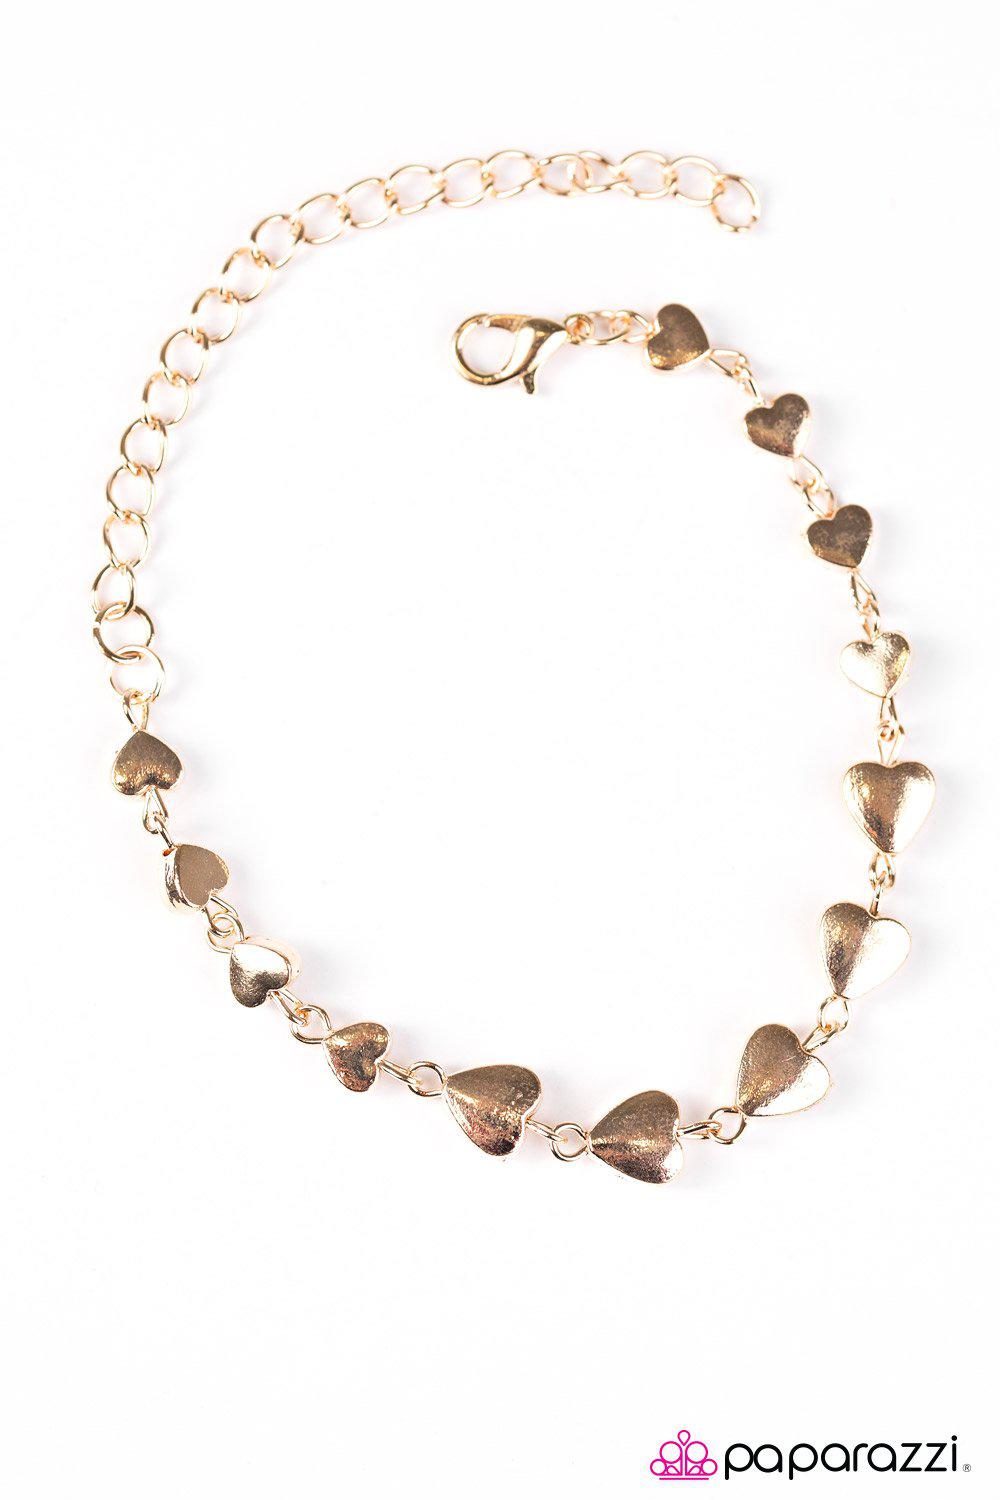 Turn up the Heartbeat Gold Bracelet - Paparazzi Accessories-CarasShop.com - $5 Jewelry by Cara Jewels